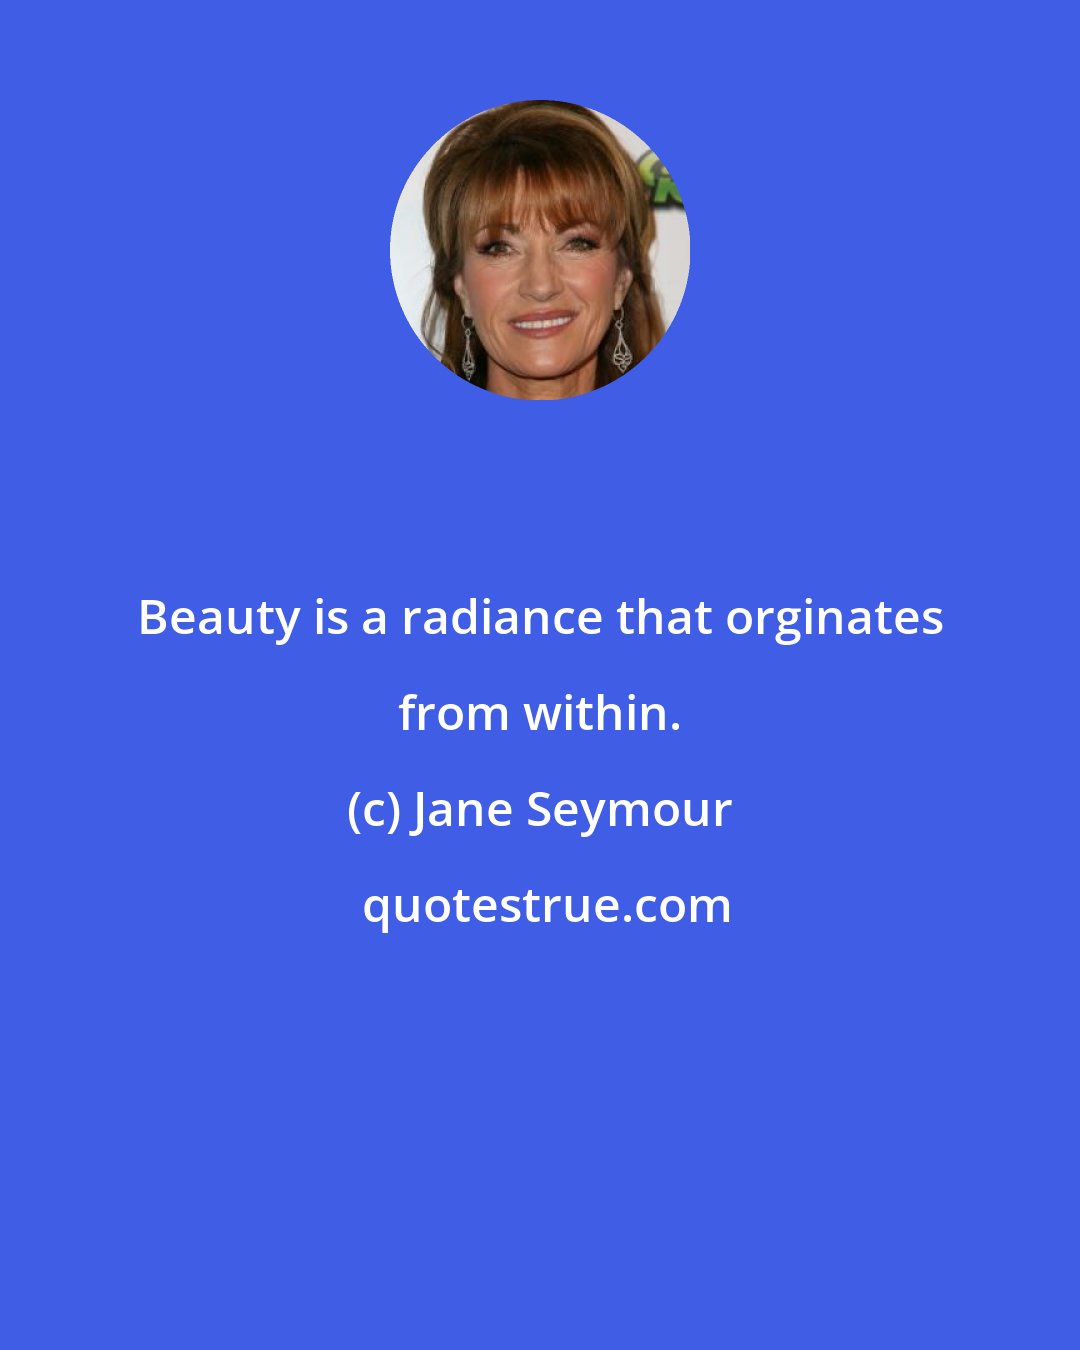 Jane Seymour: Beauty is a radiance that orginates from within.